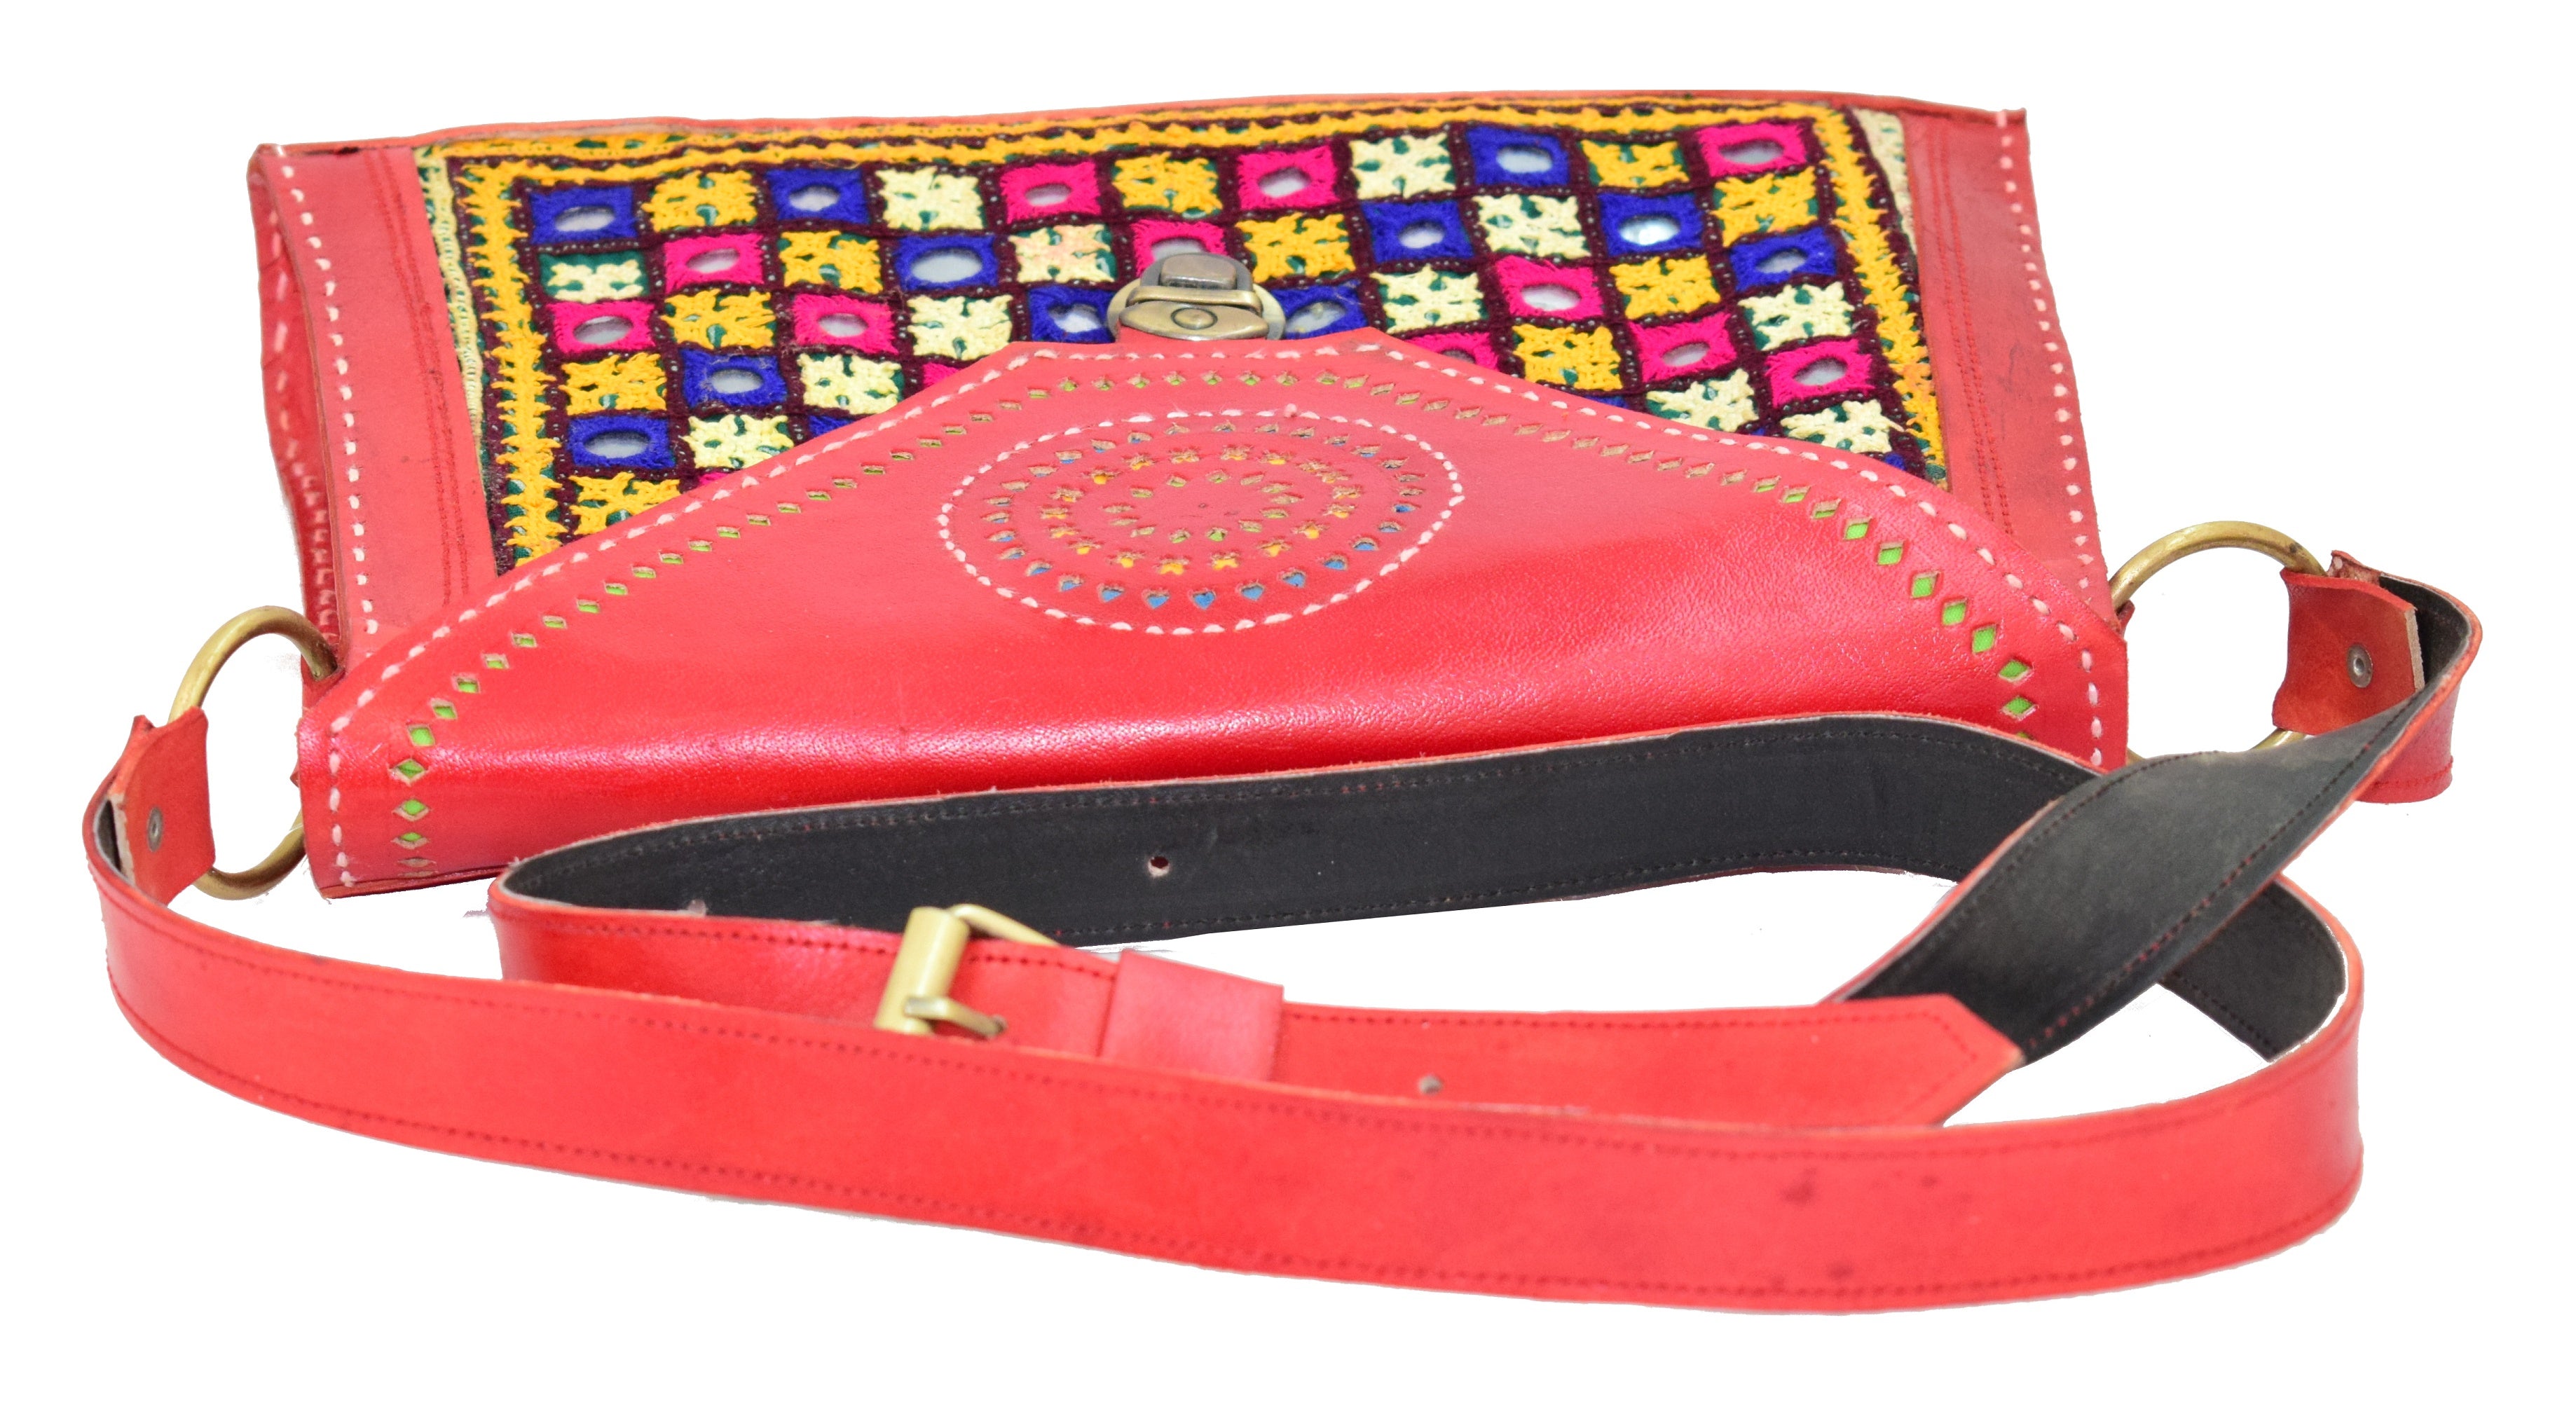 SOLD Old Kutch Embroidery Purse - WOVENSOULS Antique Textiles & Art Gallery